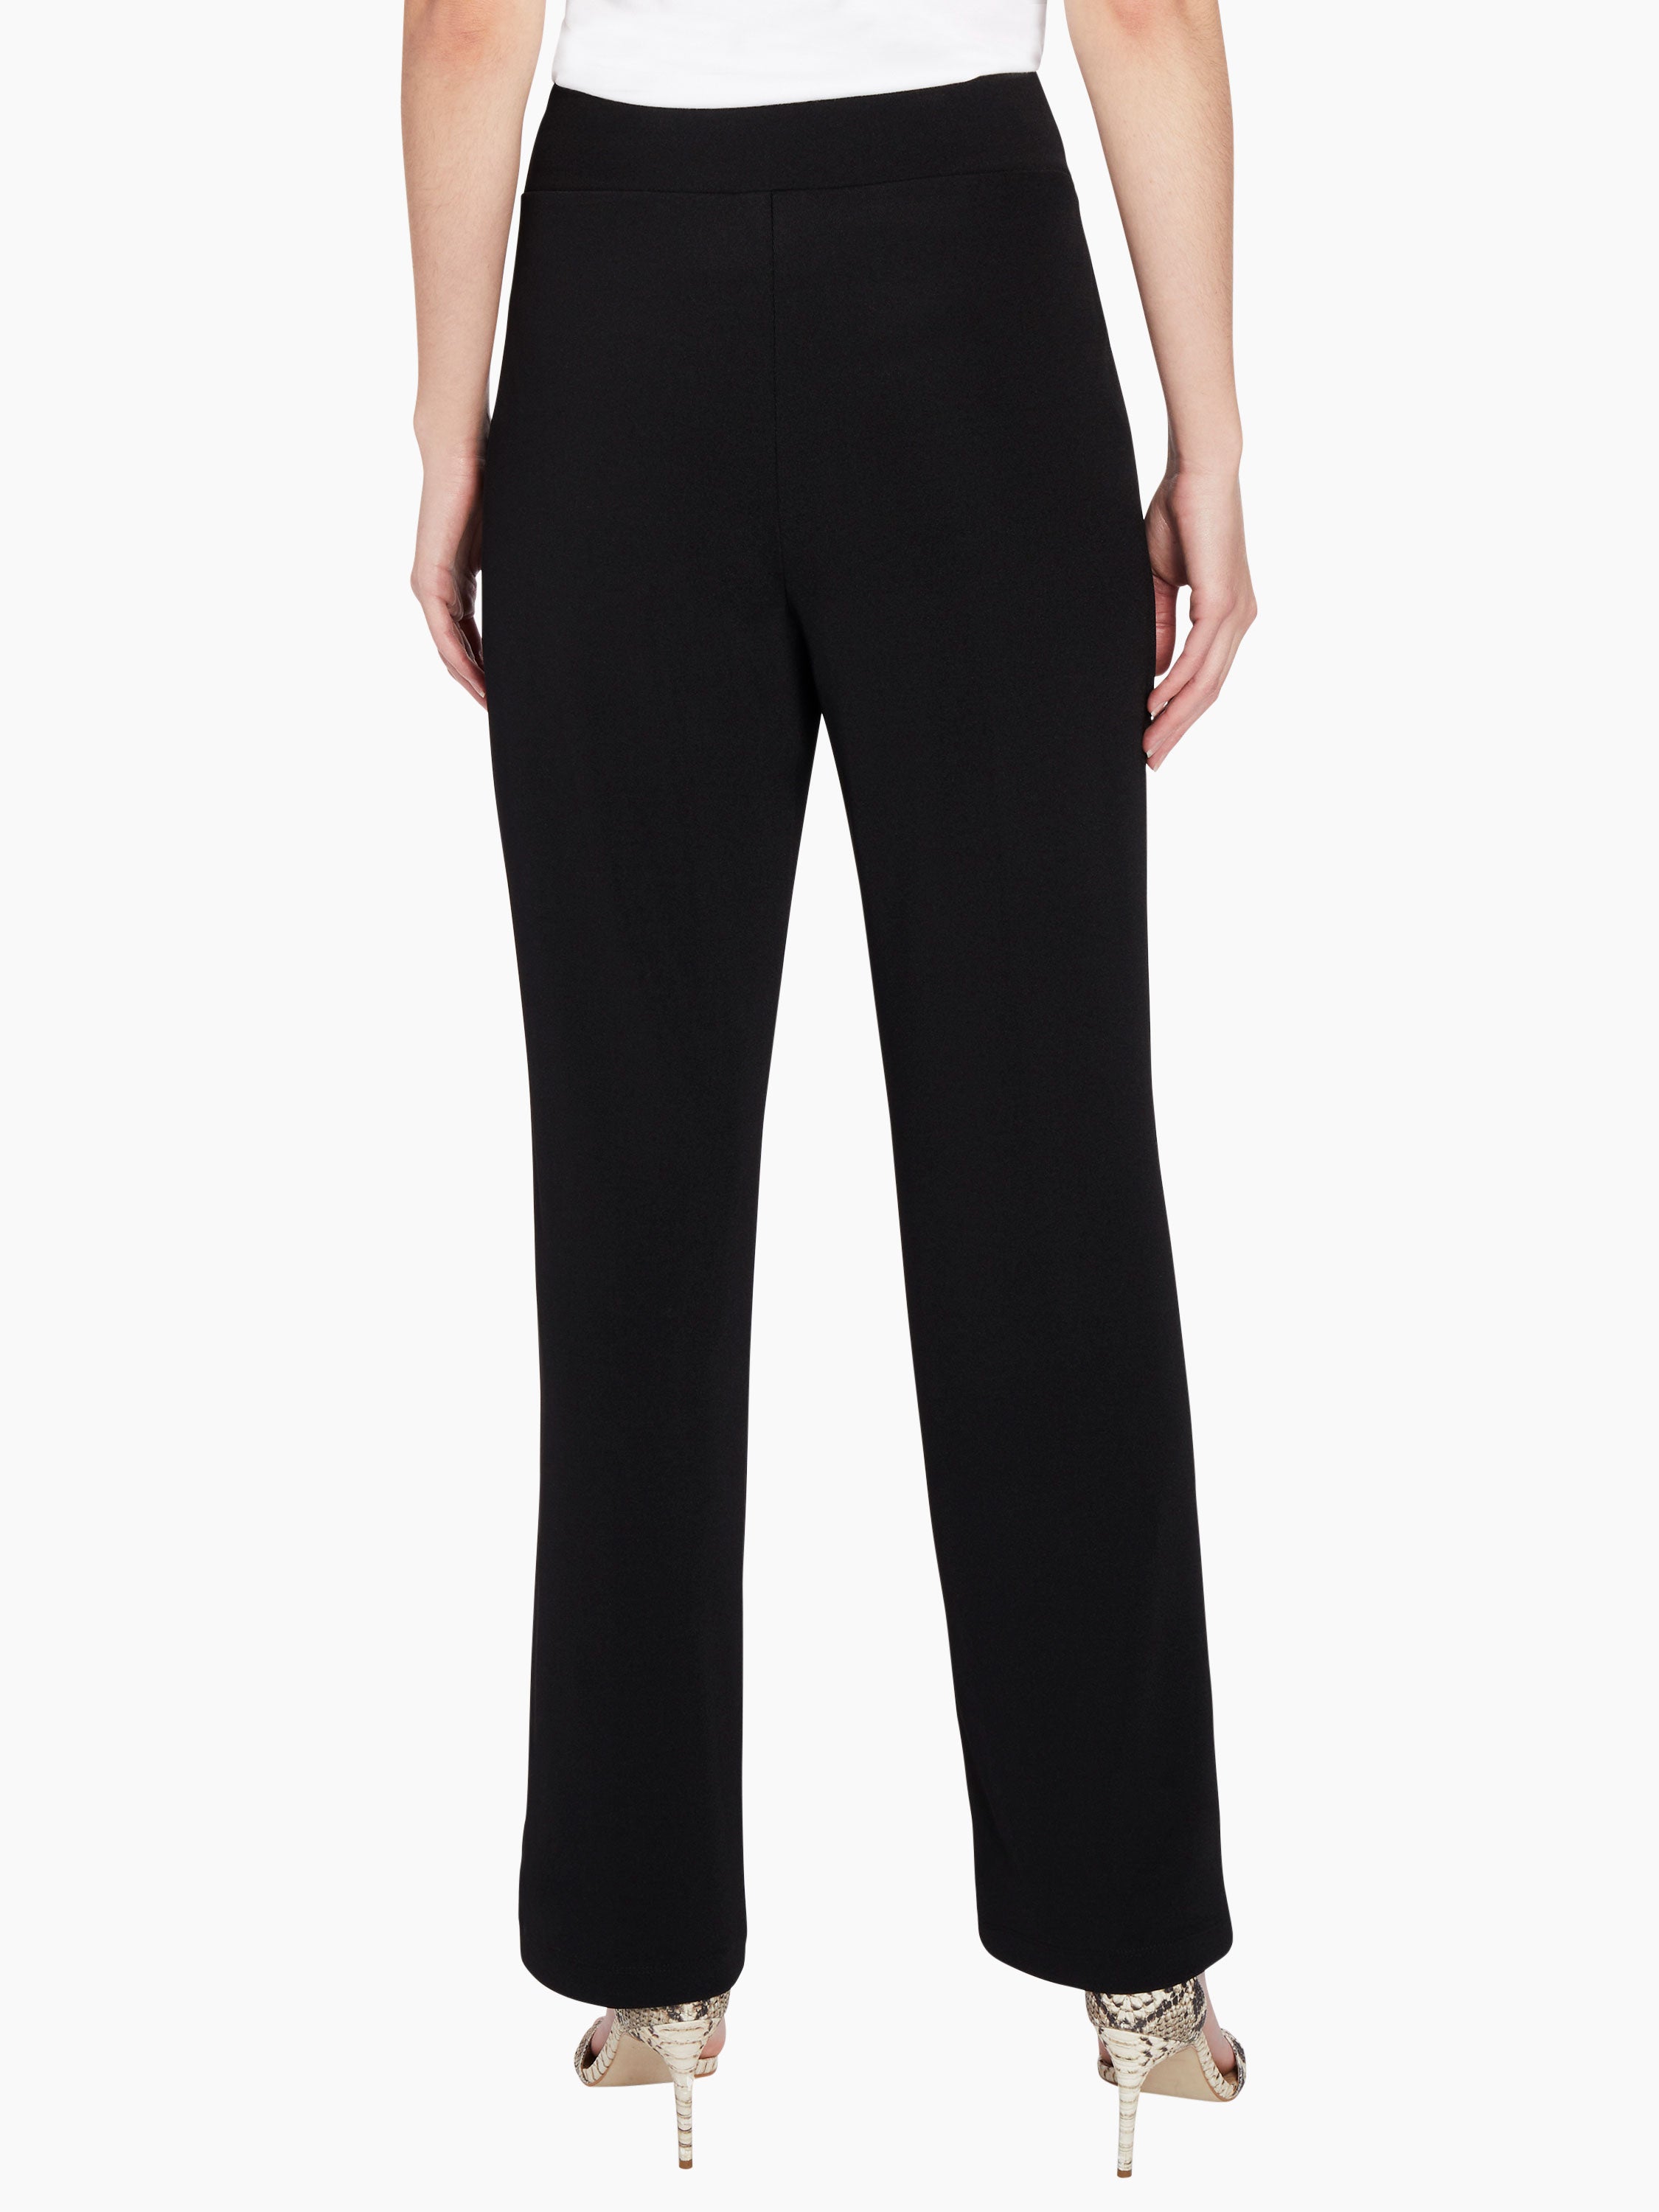 Womens elastic waist pants • Compare best prices »